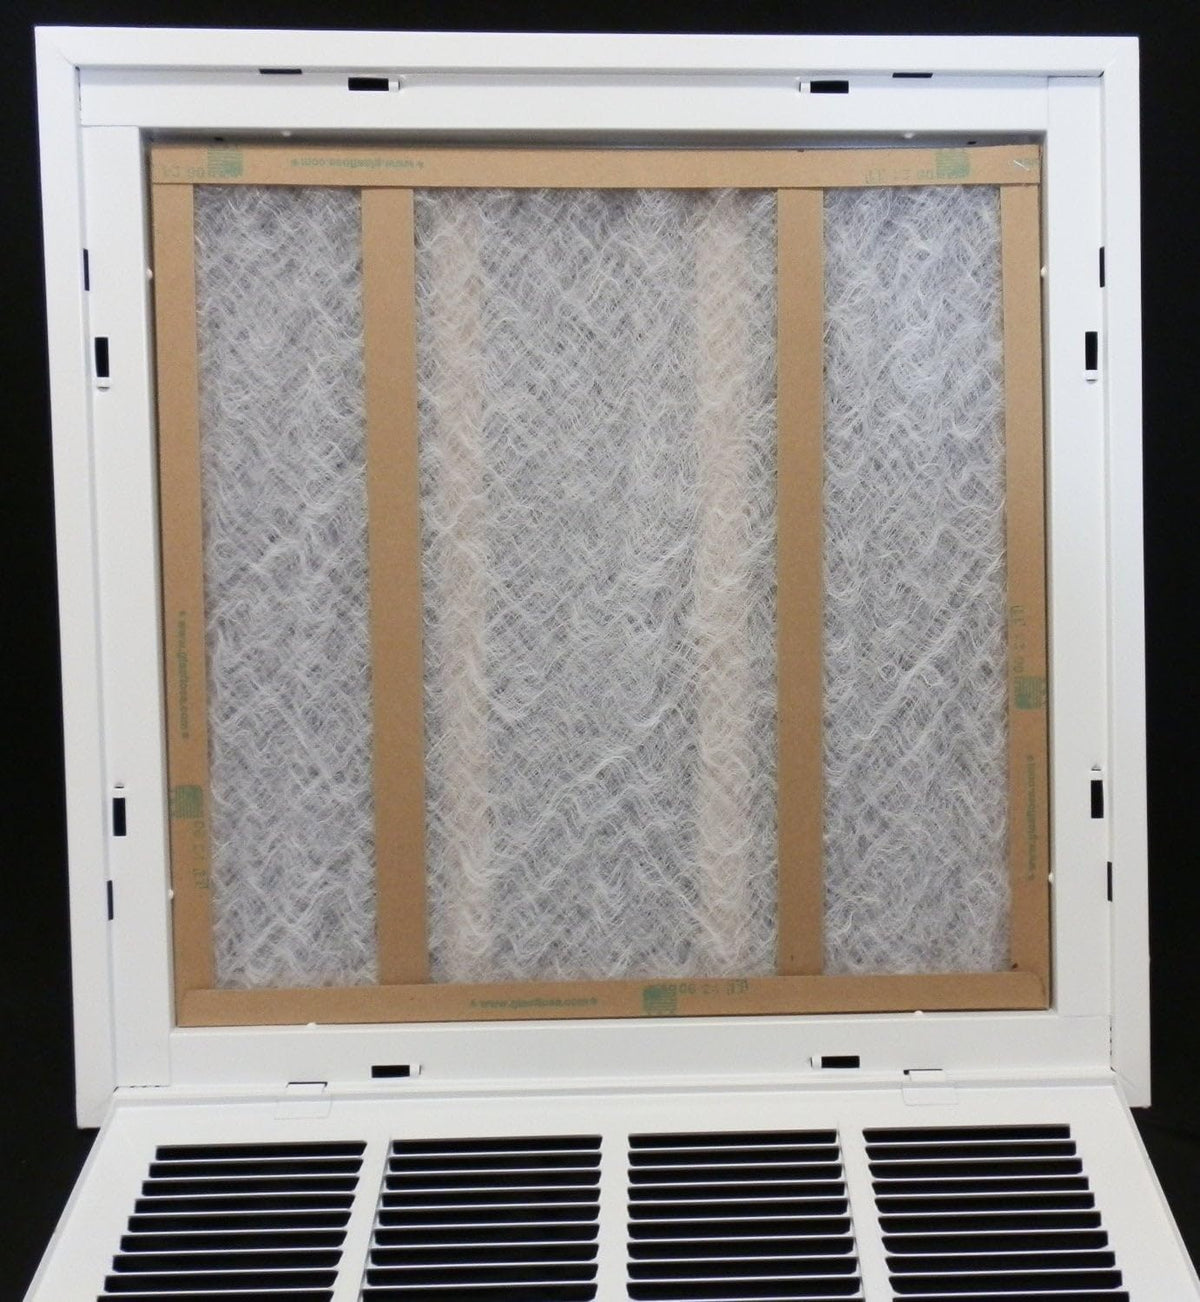 18&quot; X 30&quot; Steel Return Air Filter Grille for 1&quot; Filter - Fixed Hinge - [Outer Dimensions: 20 5/8&quot; X 32 5/8&quot;]